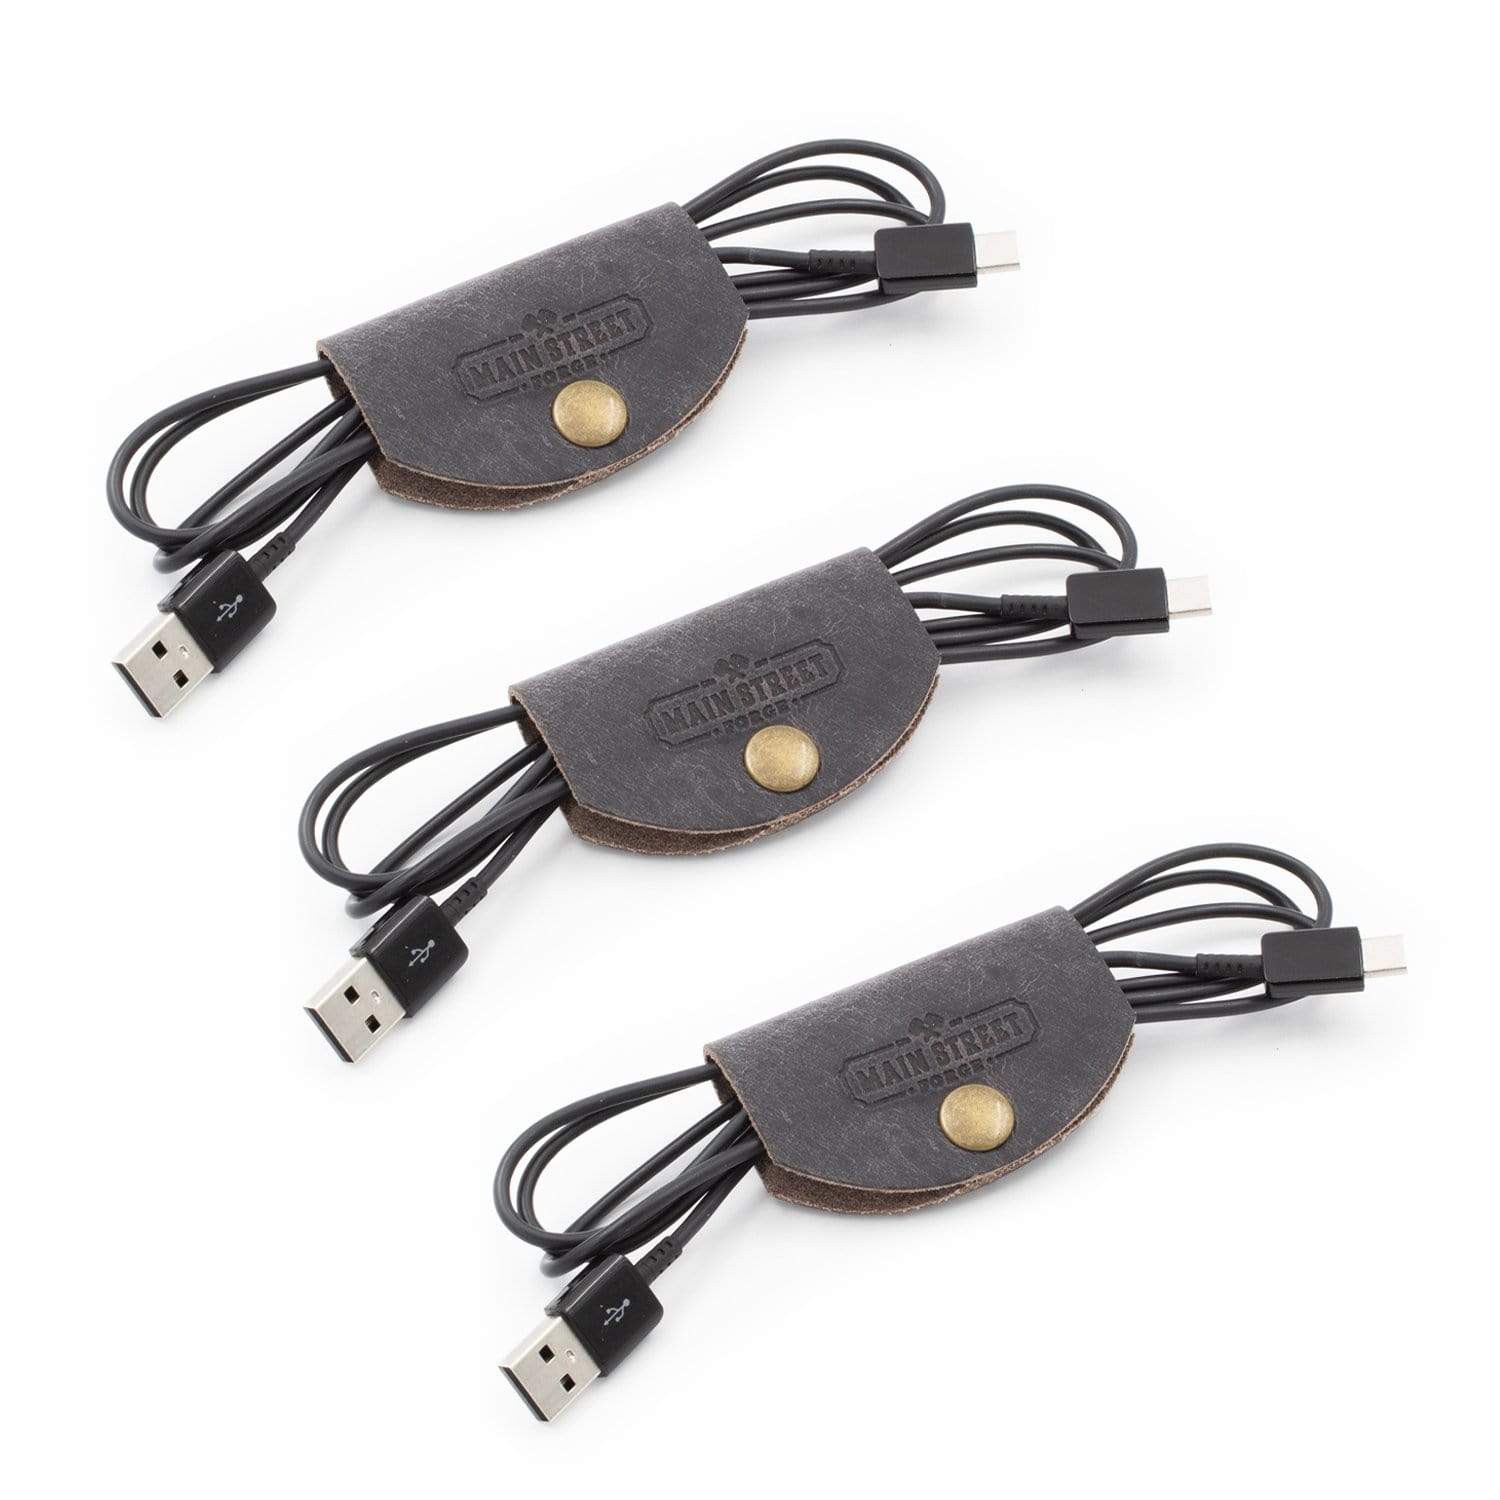 Leather Cord Wraps / Cable Organizers Avalanche Gray / 1-Pack